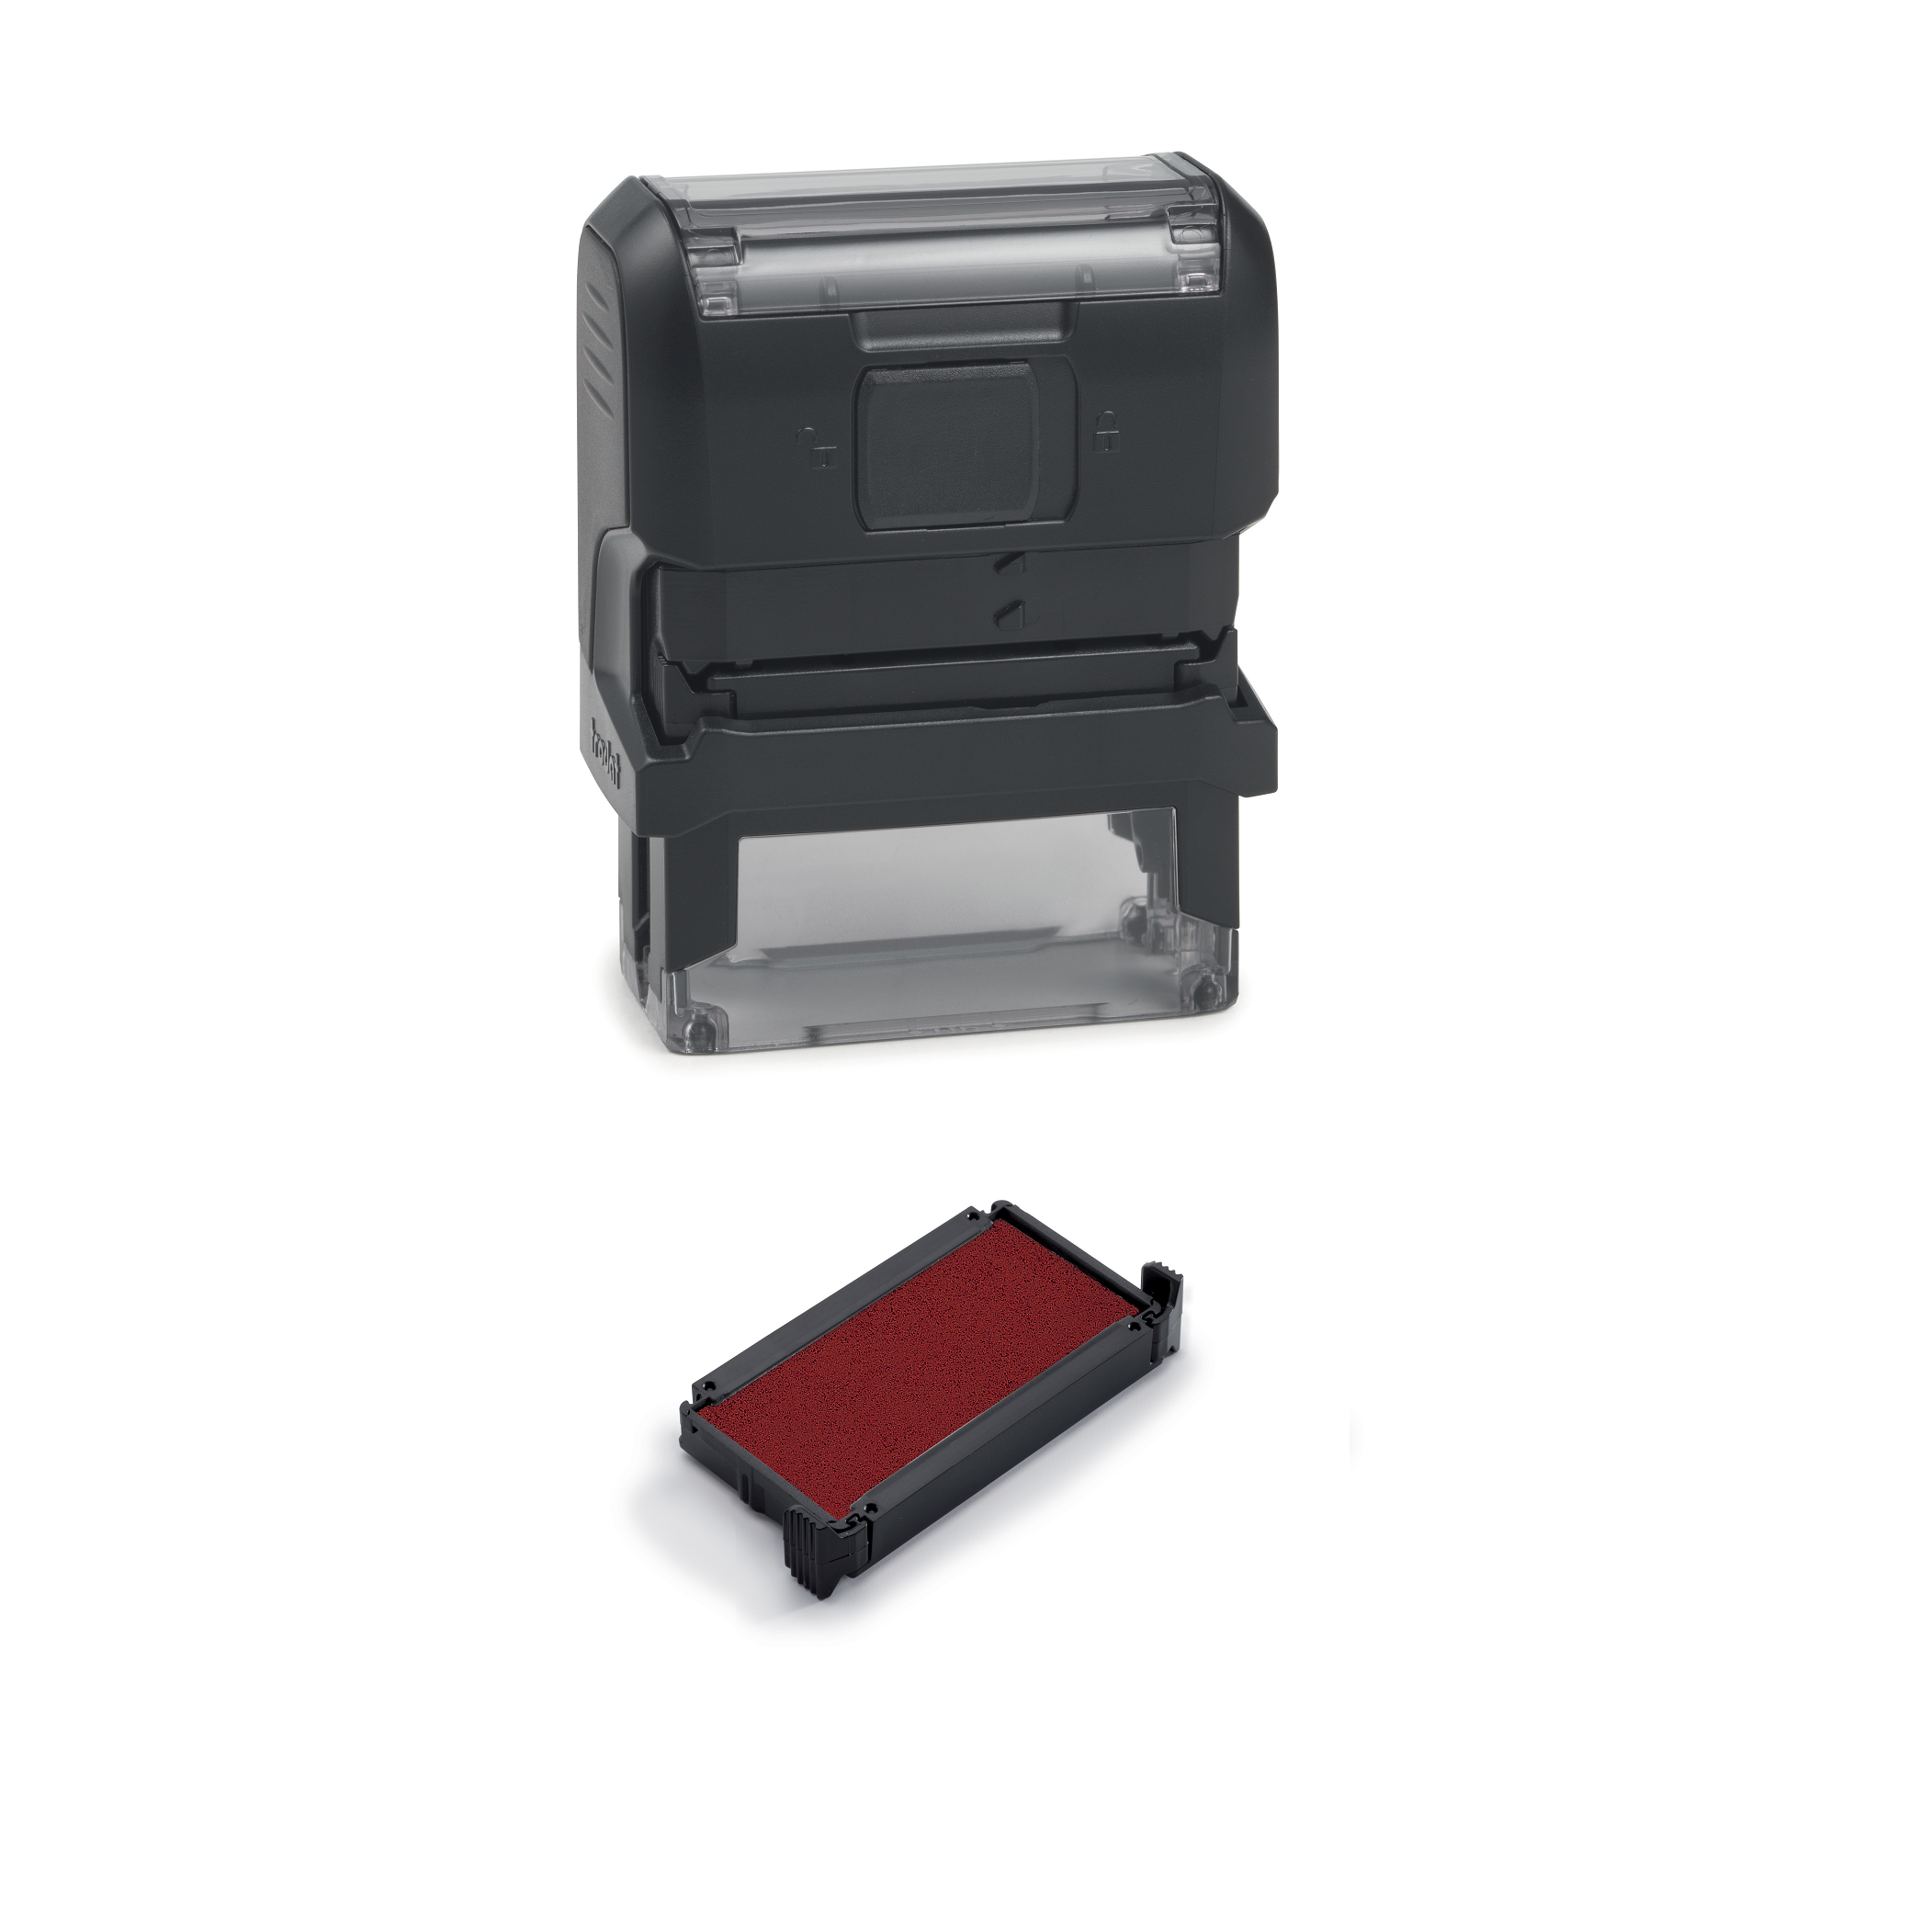 Third Request Office Self Inking Rubber Stamp